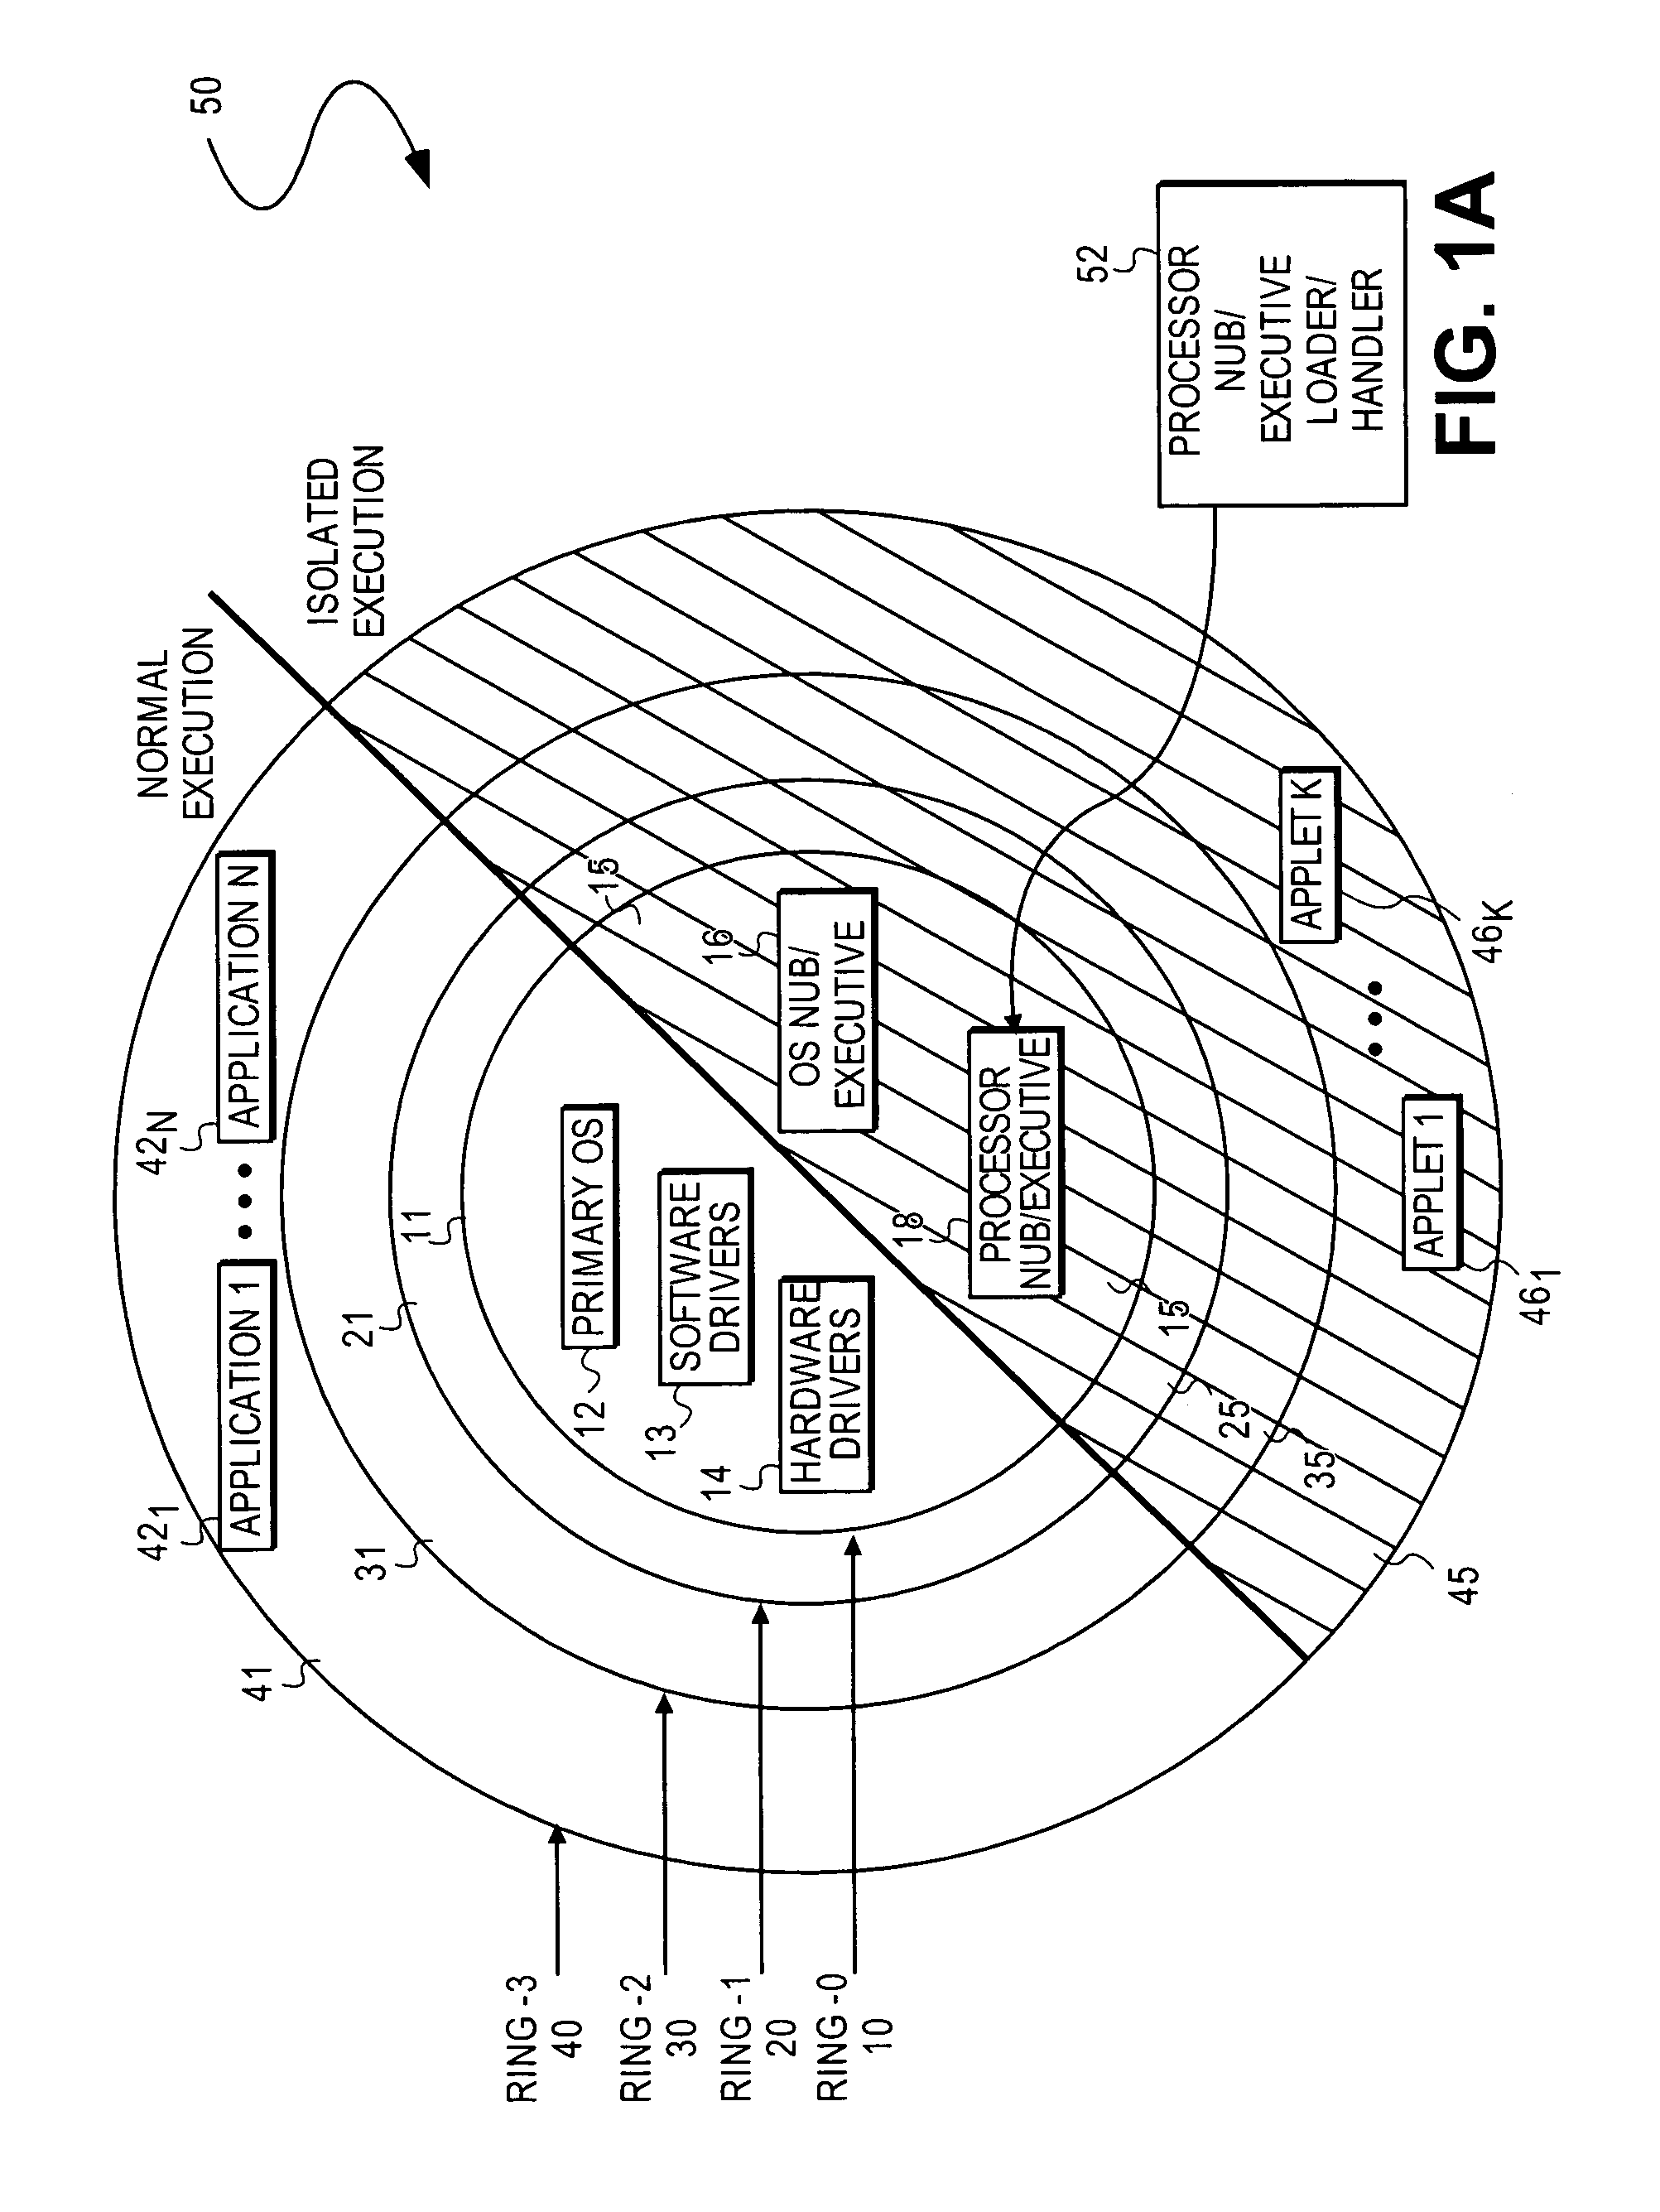 Managing a secure environment using a chipset in isolated execution mode